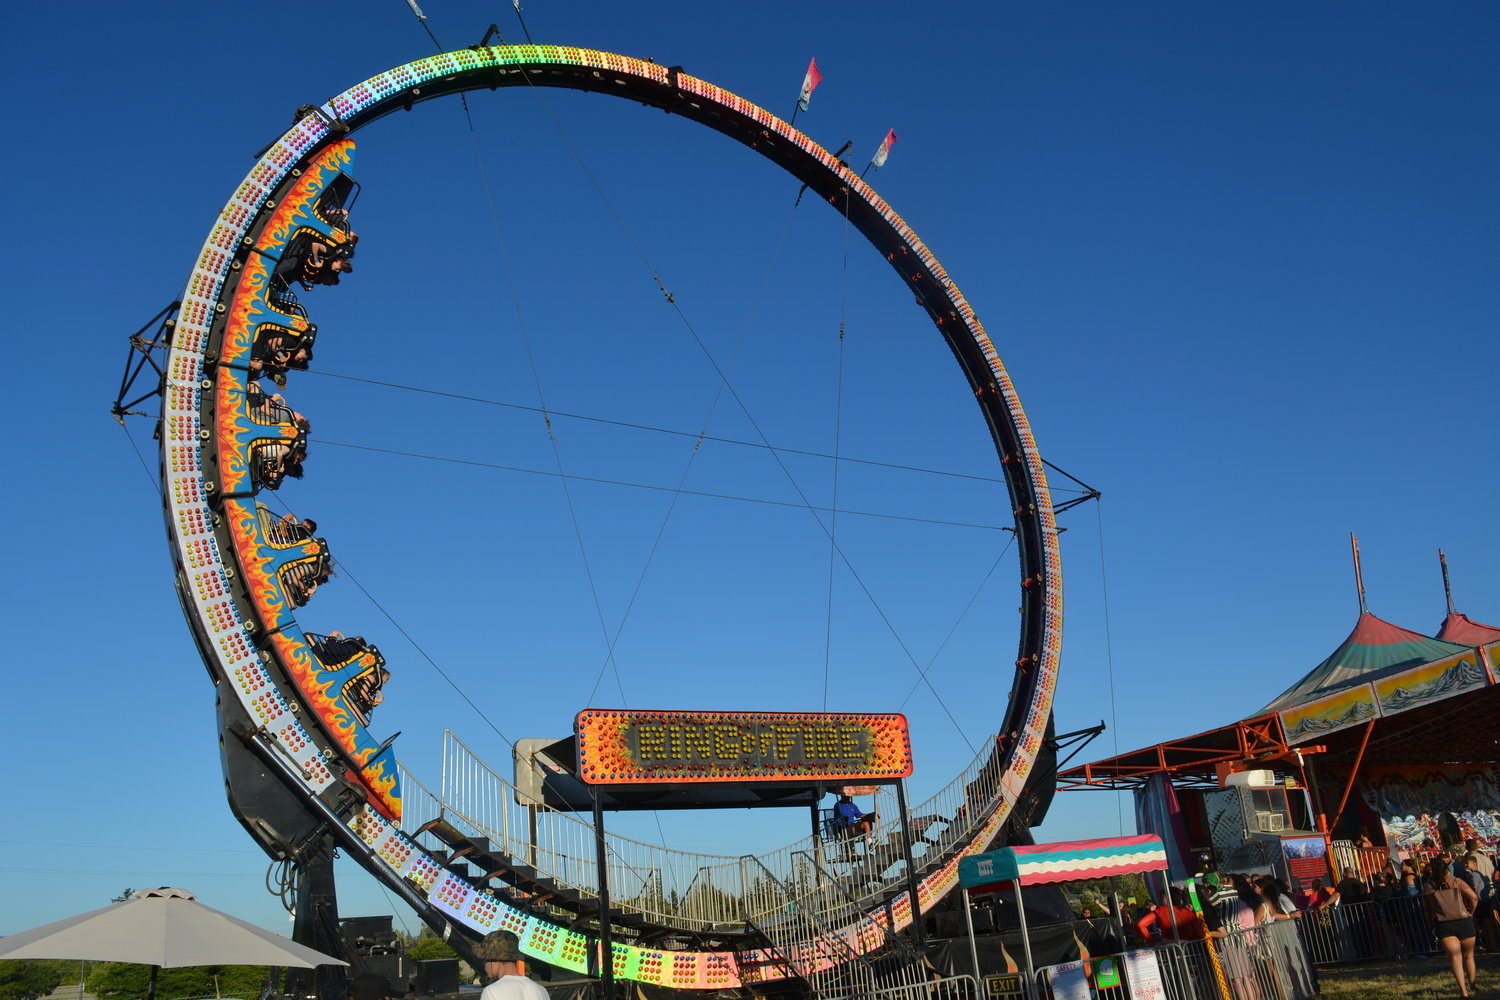 The Ring of Fire is one of many carnival rides featured at the Clark County Fair.